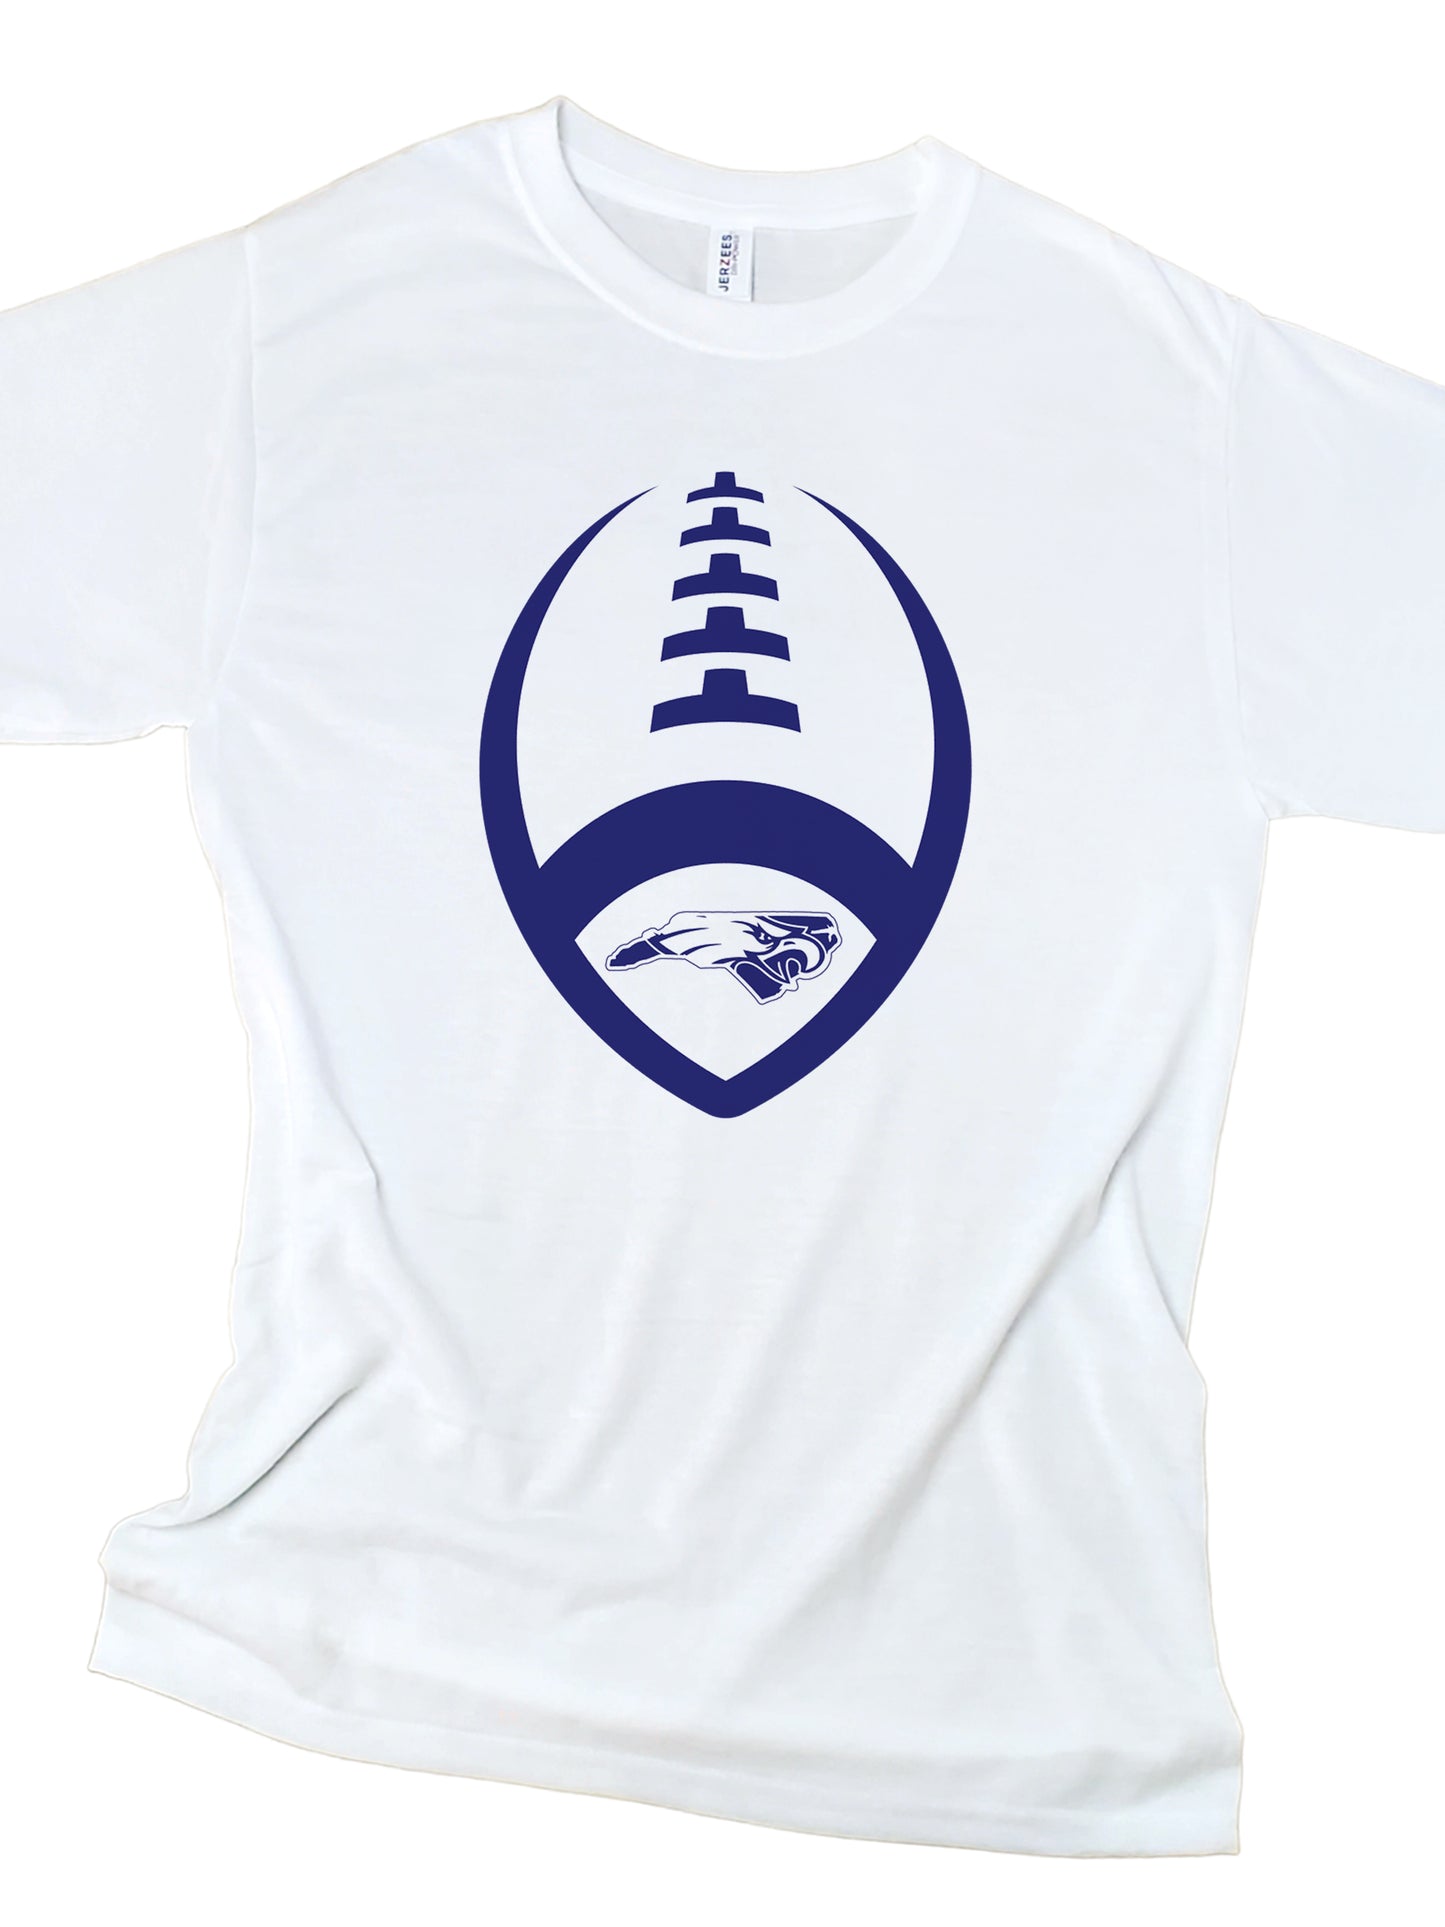 Fighting Eagles Football T shirt,  Short Sleeve Eagles shirt with Logo